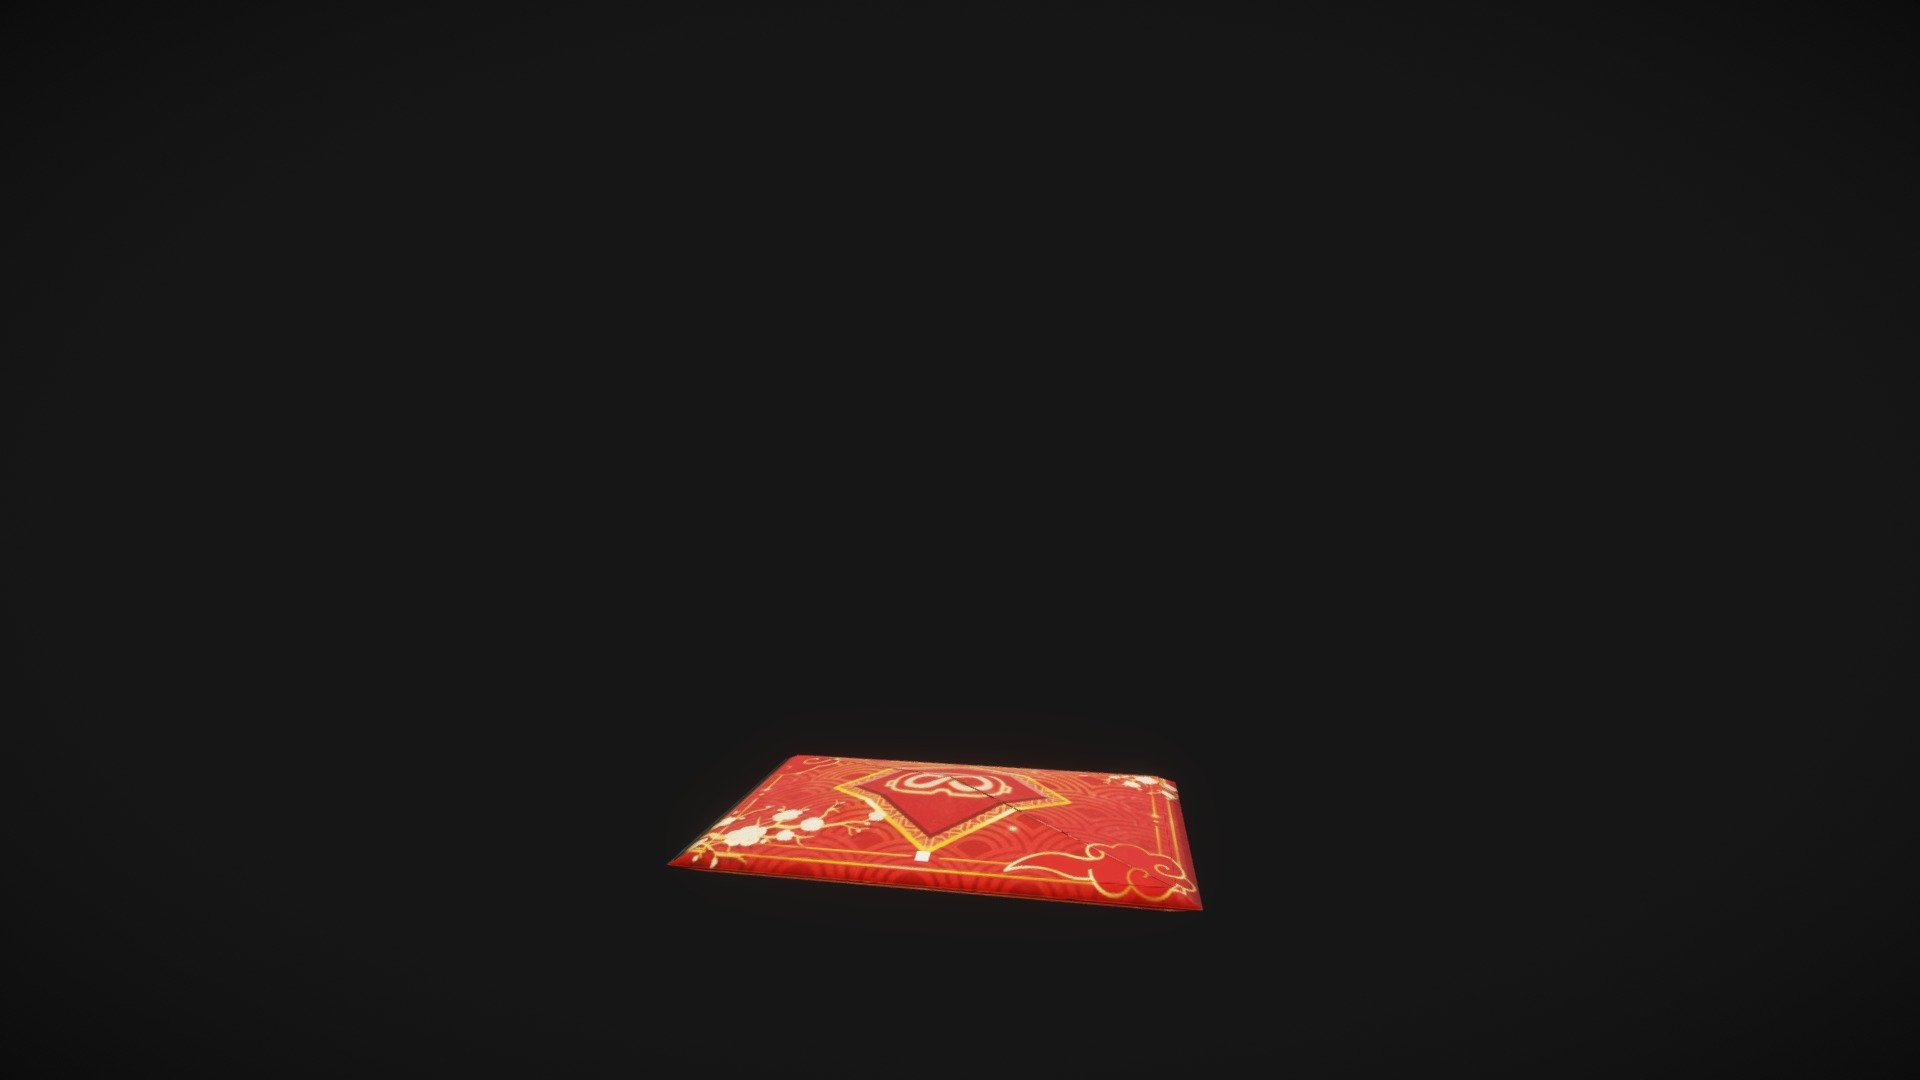 The Game |

ForeVR Darts is the second flagship game by ForeVR Games Studio released for the VR Oculus Quest Community.  I had the opportunity to be a part of the great development team creating this fun &amp; engaging VR game for Oculus Quest.  For this release, I was provided with the task to design, create, and package the whole Chinese Lunar New Year prop set during this Holiday update with ForeVR Darts Seasonal release.

Lunar Year Red Envelope | Interactive Prop

For this fun project, the objective was to design and create a Chinese New Year traditional gift giving of &lsquo;Red Envelope' to present to our players from ForeVR Studio.  In pushing the envelope (pun intended) with the process of design and creativity, I wanted to give our players a visually surprising, fun, and interactive prop when opening the red envelope awaiting them in our lobby.  Instead of simply providing a pop-up coin from the envelope, I packed the envelope with an ensemble of Lunar Year themed design as the pop-up upon player interaction! - ForeVR Darts | Chinese Lunar Year - Red Envelope - 3D model by tyronejalarcon 3d model